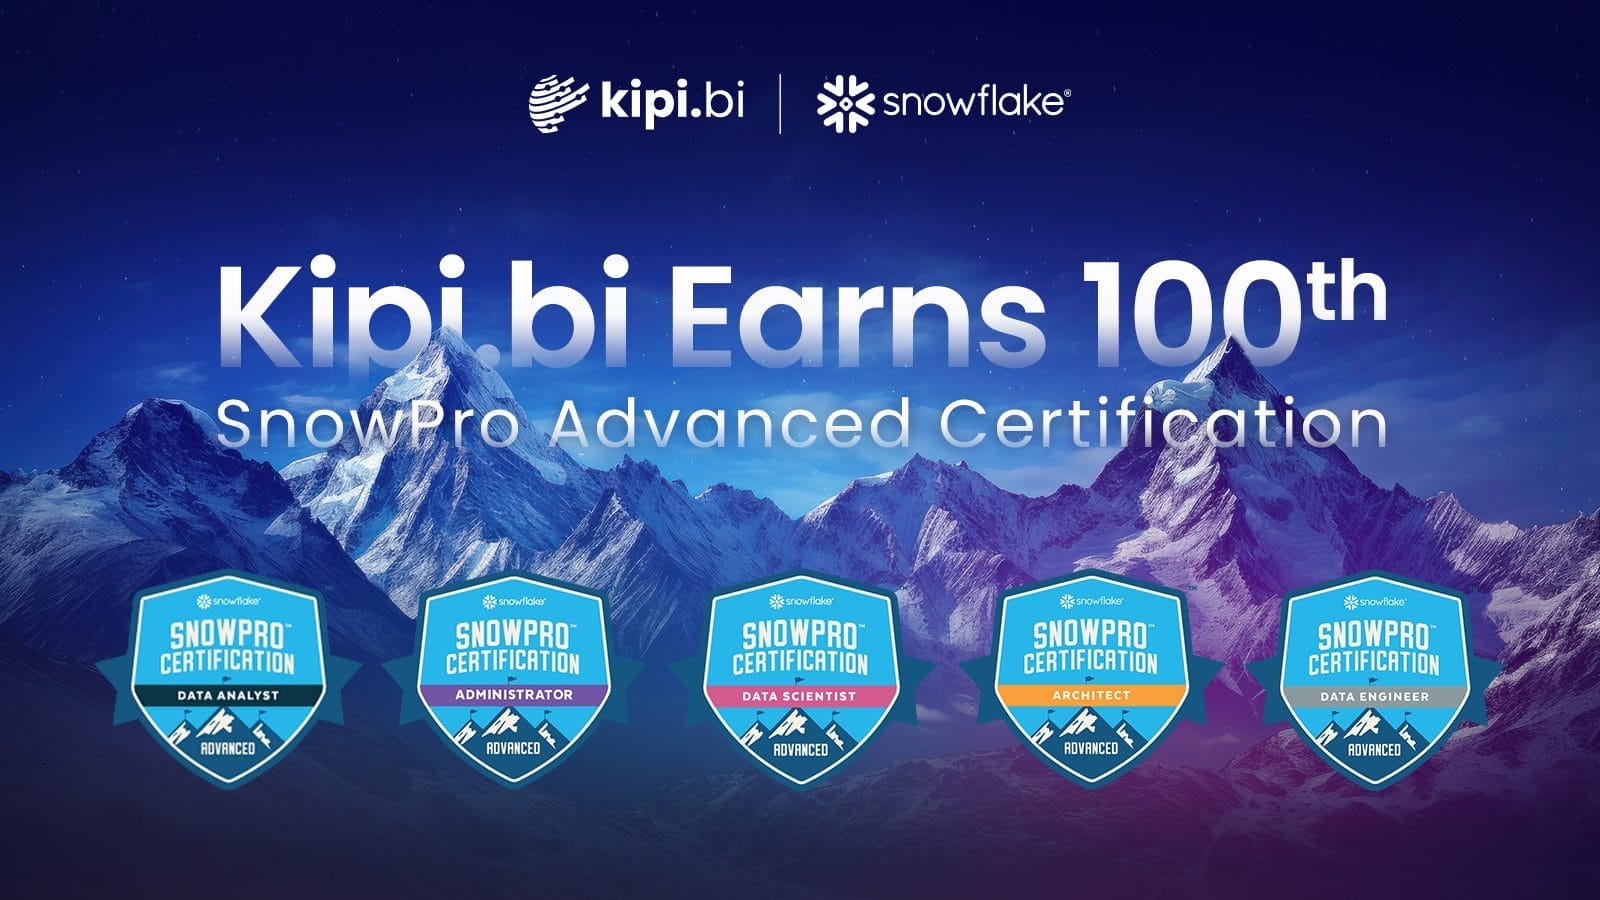 kipi.bi Achieves 100th SnowPro Advanced Certification, First in Snowflake Partner Network to Reach Milestone